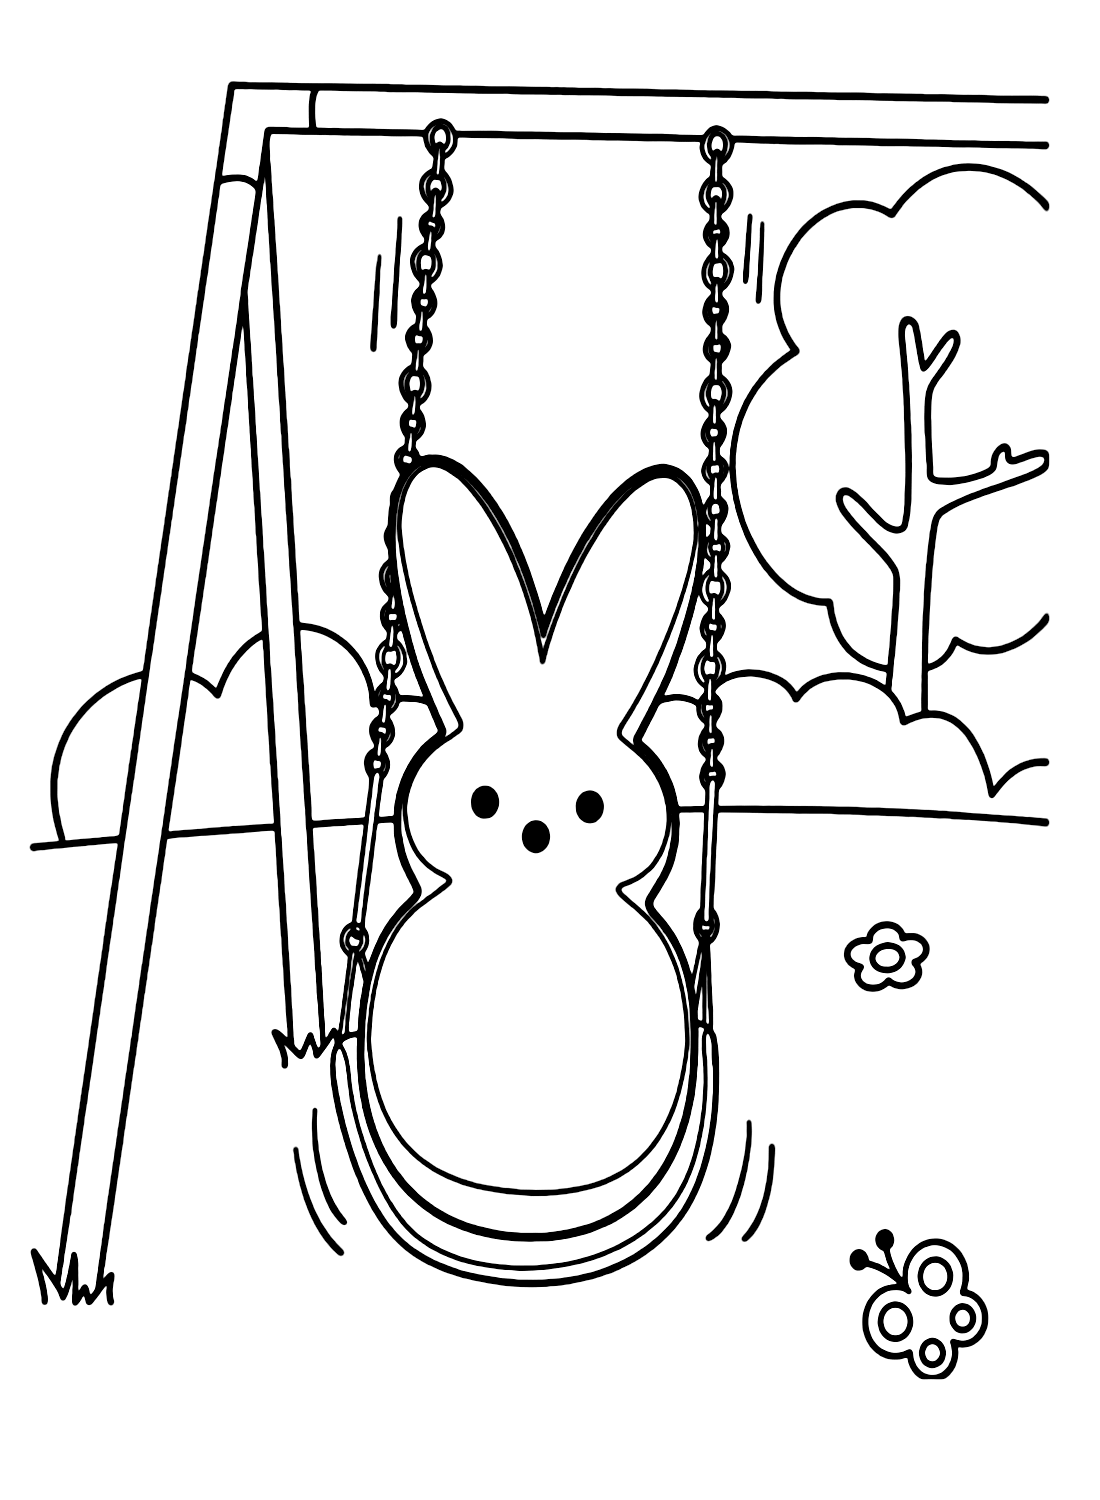 Peeps Rabbit Playing on Swings Coloring Page